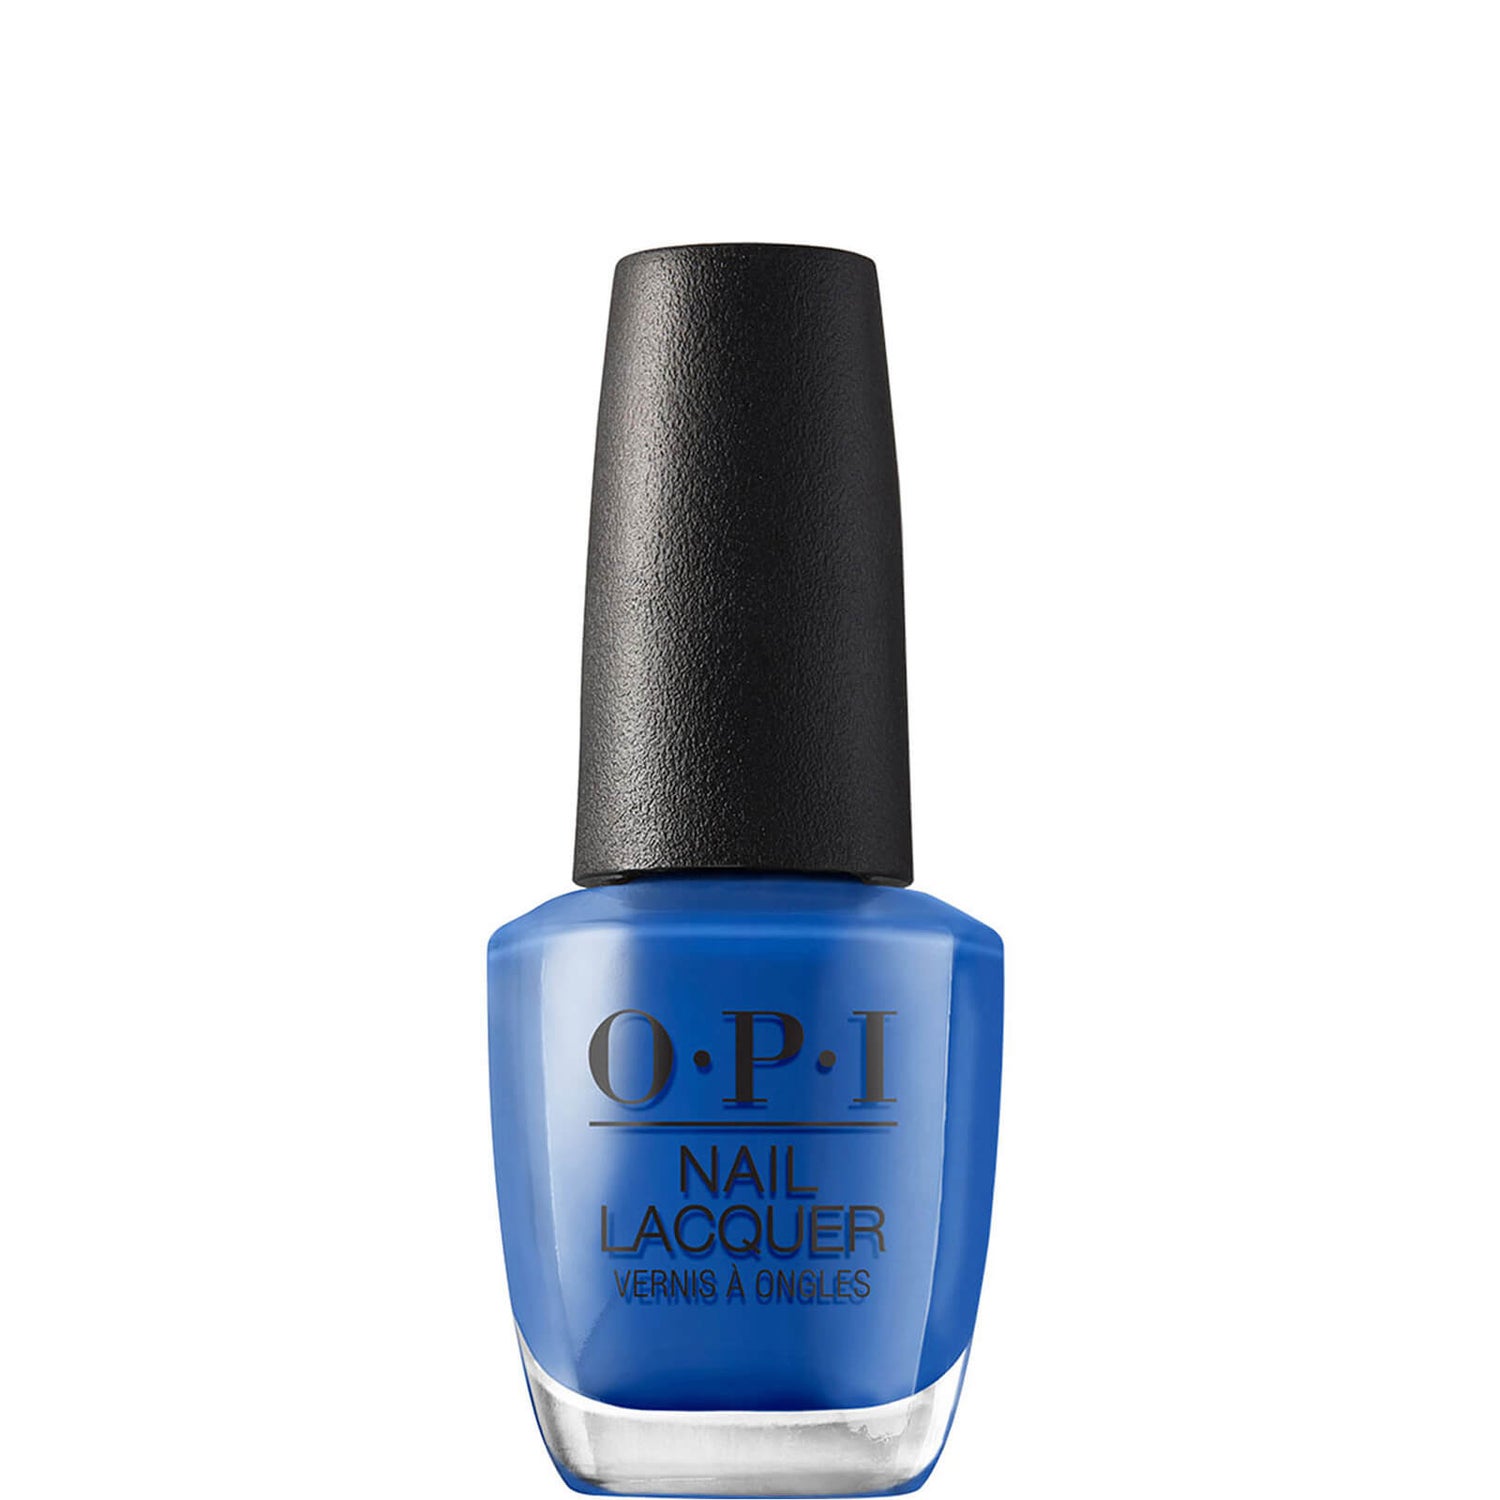 OPI Nail Lacquer - Tile Art to Warm Your Heart 0.5 fl. oz